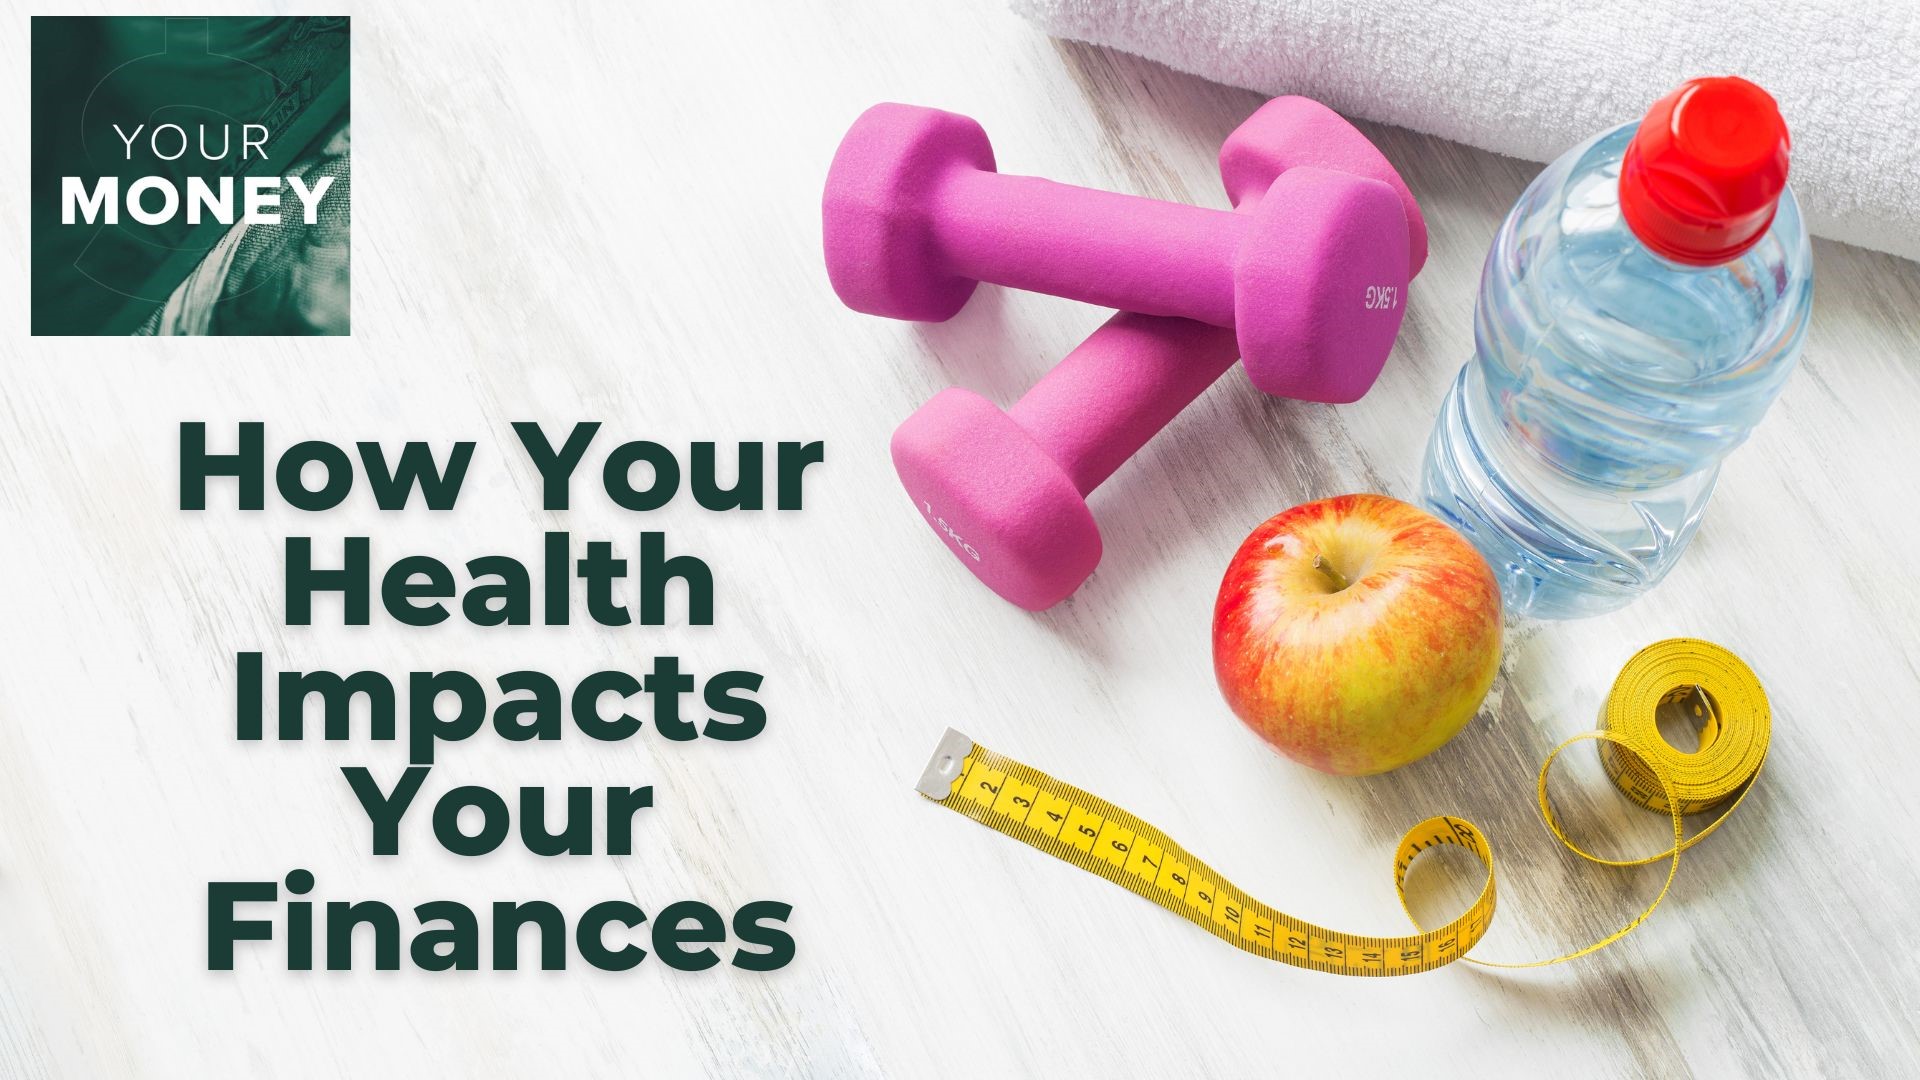 Gordon Severson sits down with a fitness expert to discuss how you can get healthy in the new year. Plus how your health impacts your wallet and ways you can save.